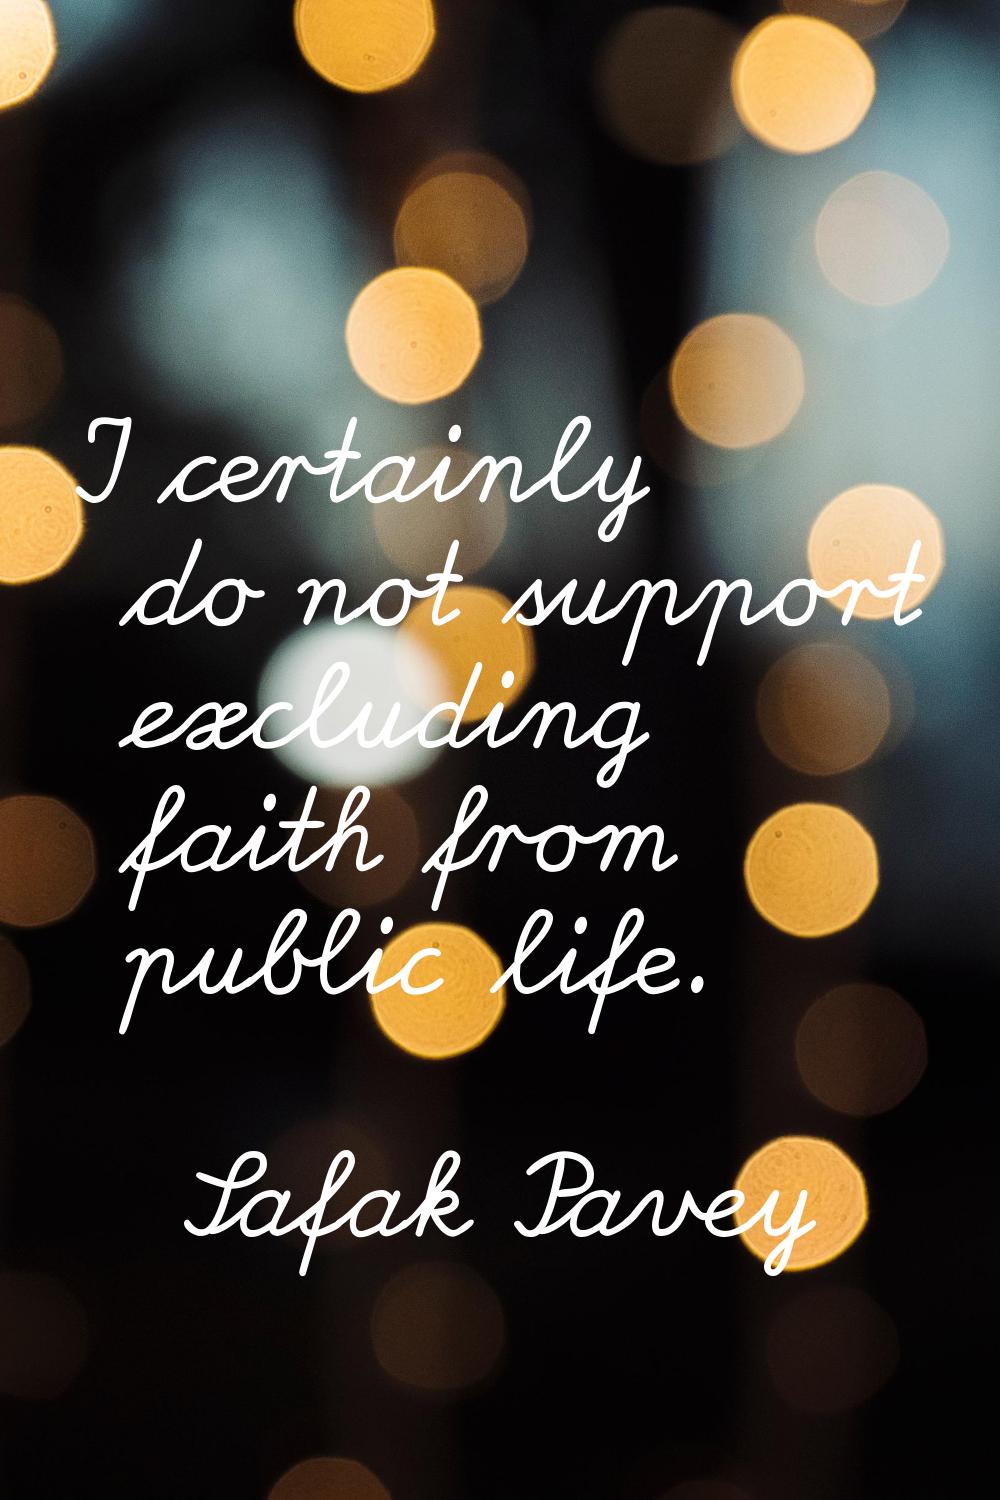 I certainly do not support excluding faith from public life.